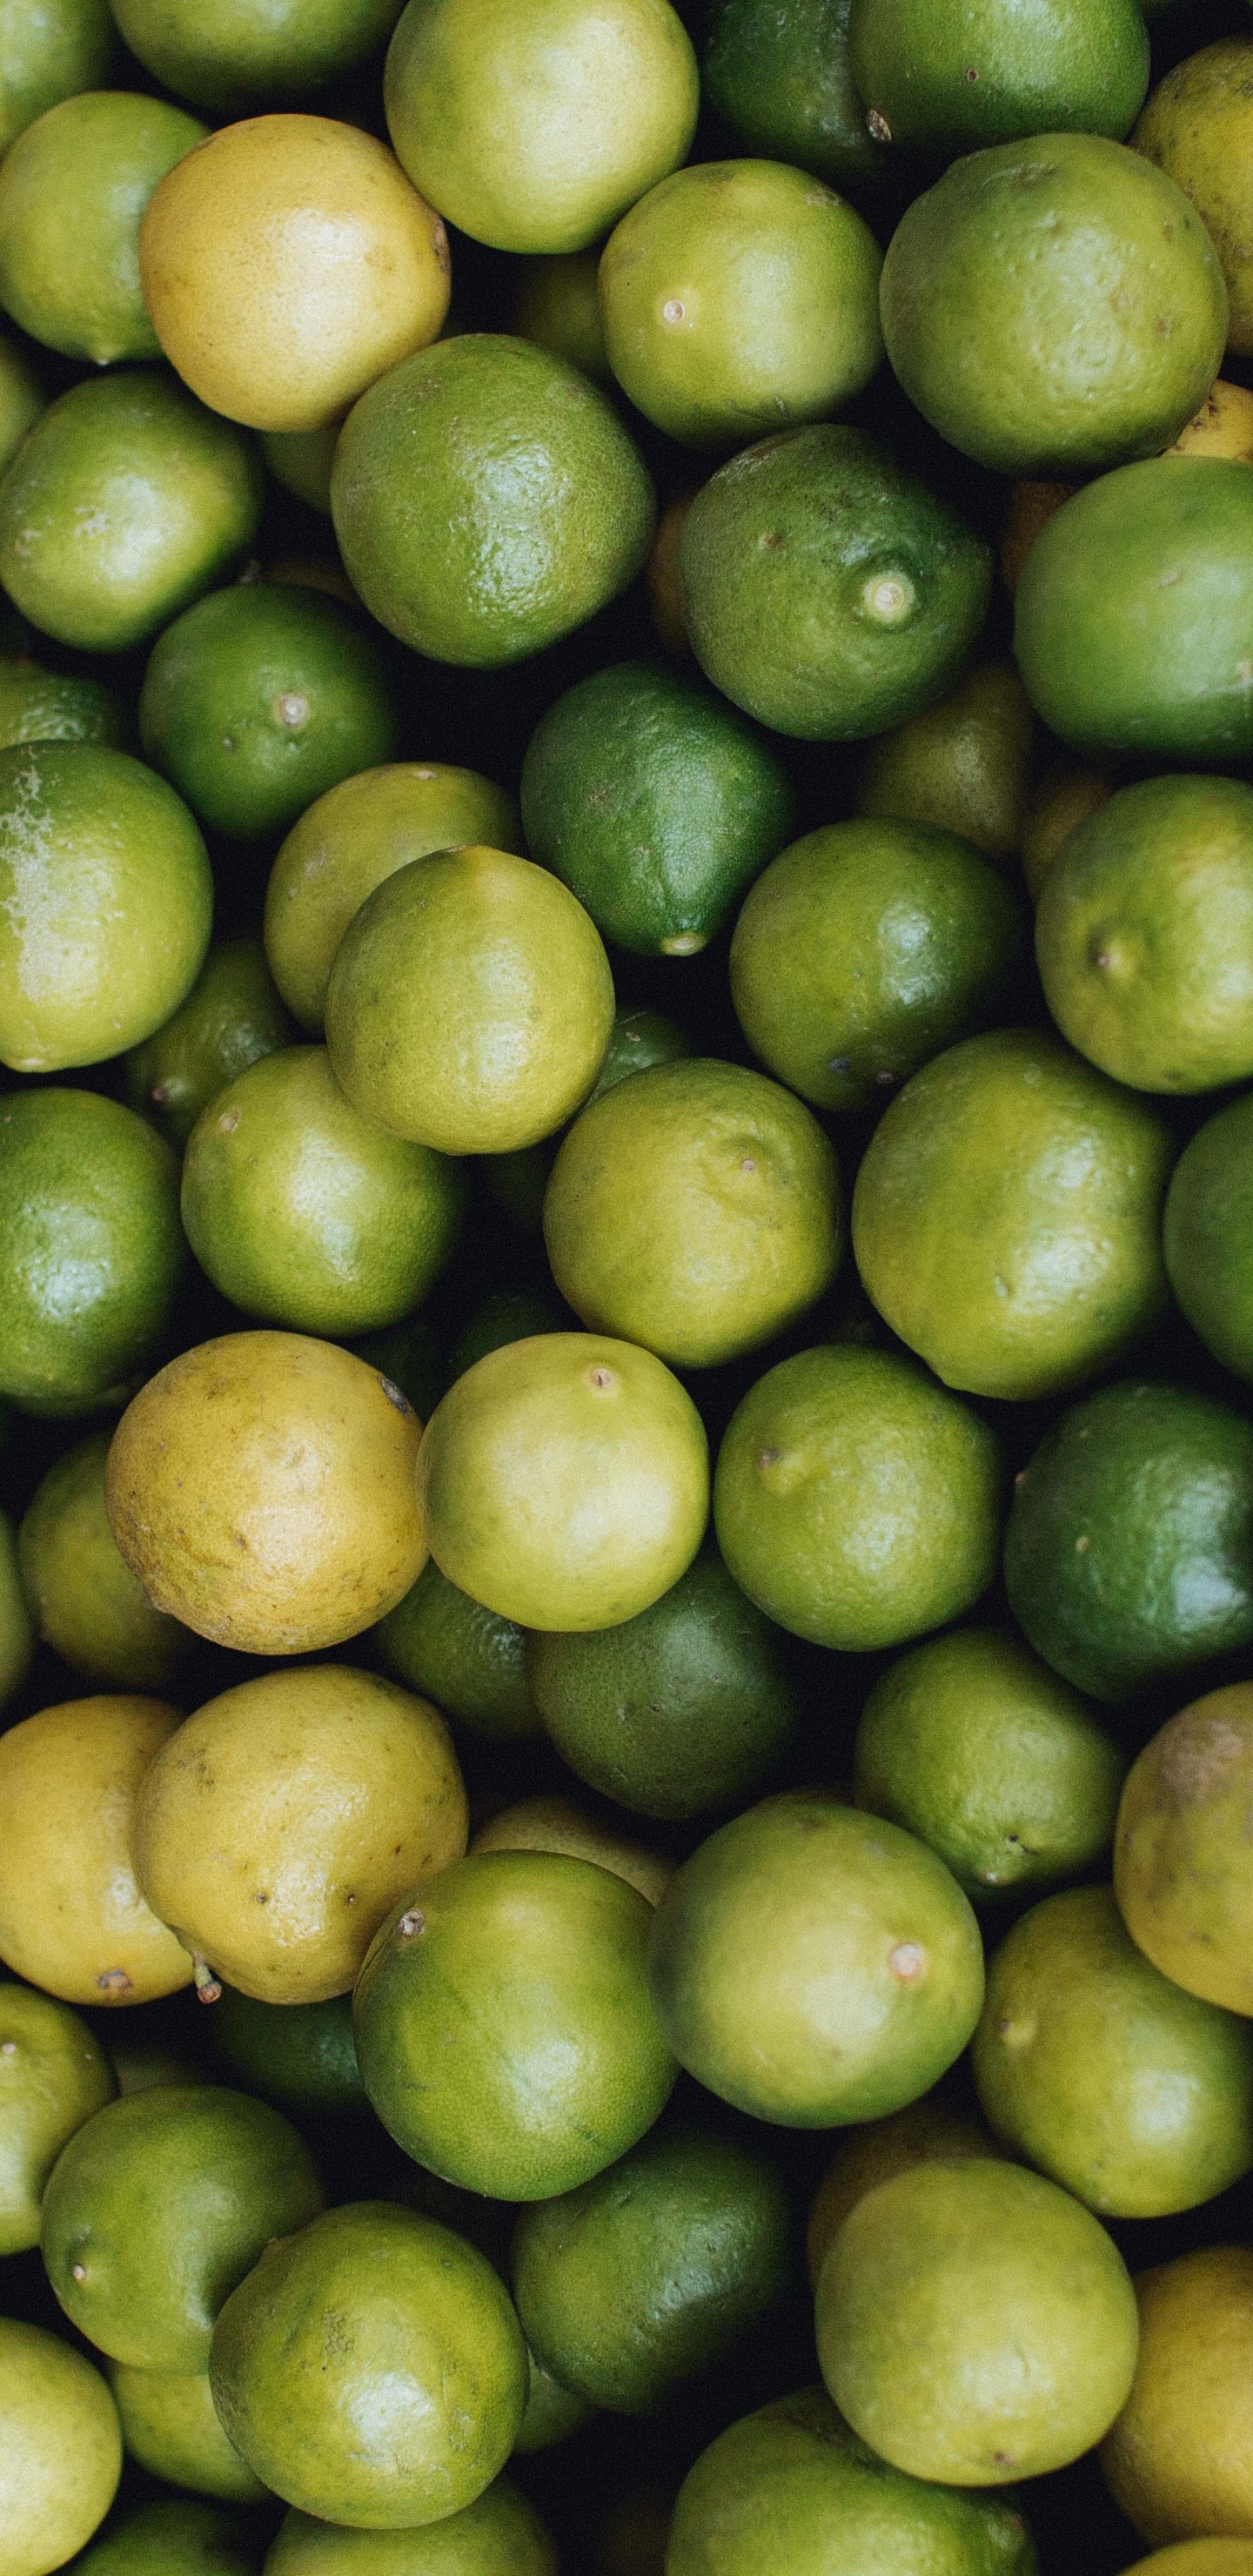 Green and Yellow Round Fruits. Wallpaper in 1440x2960 Resolution